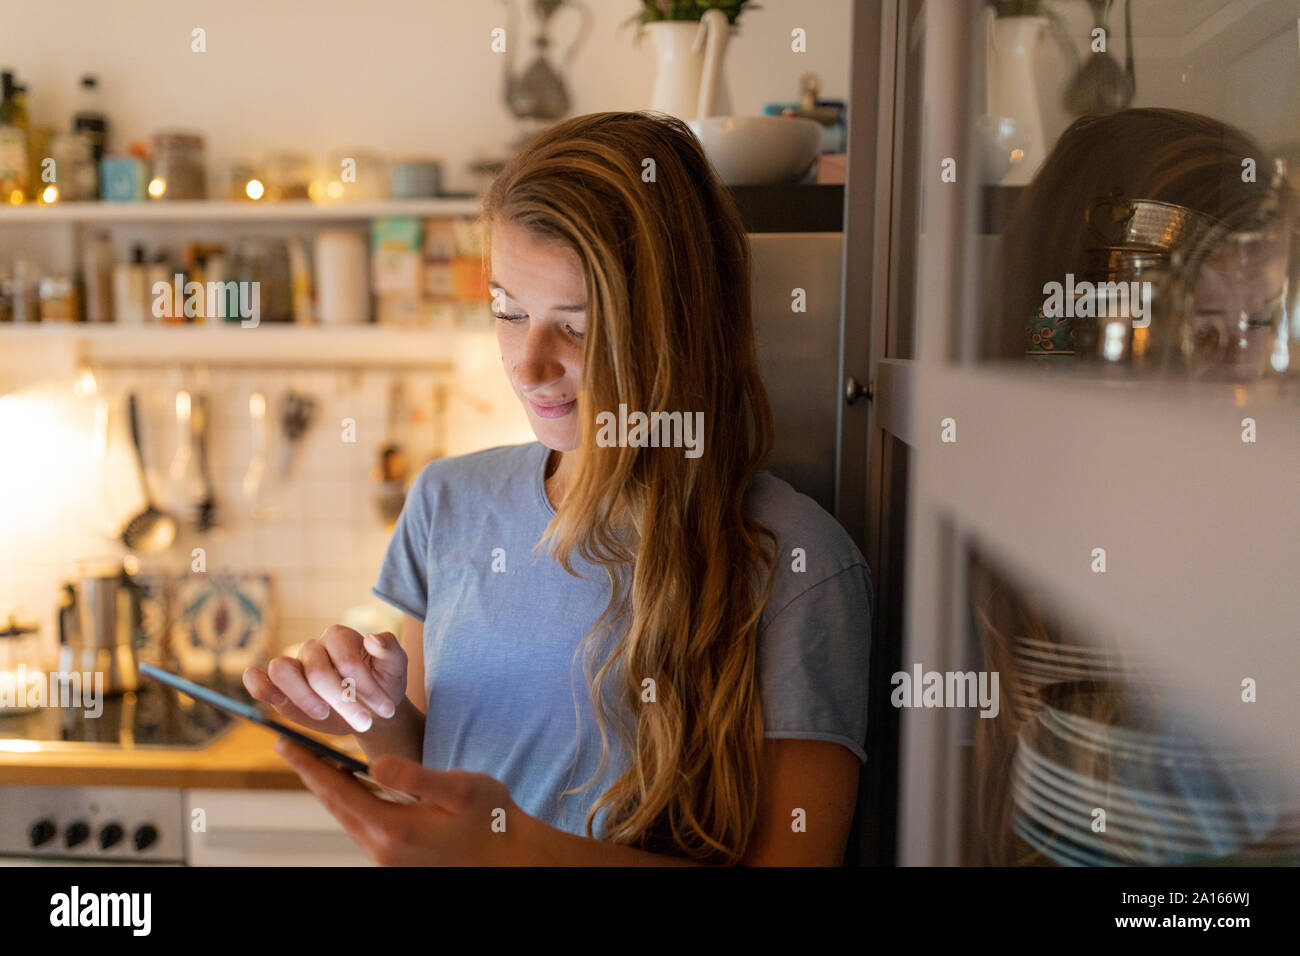 Young woman in kitchen at home using tablet Stock Photo